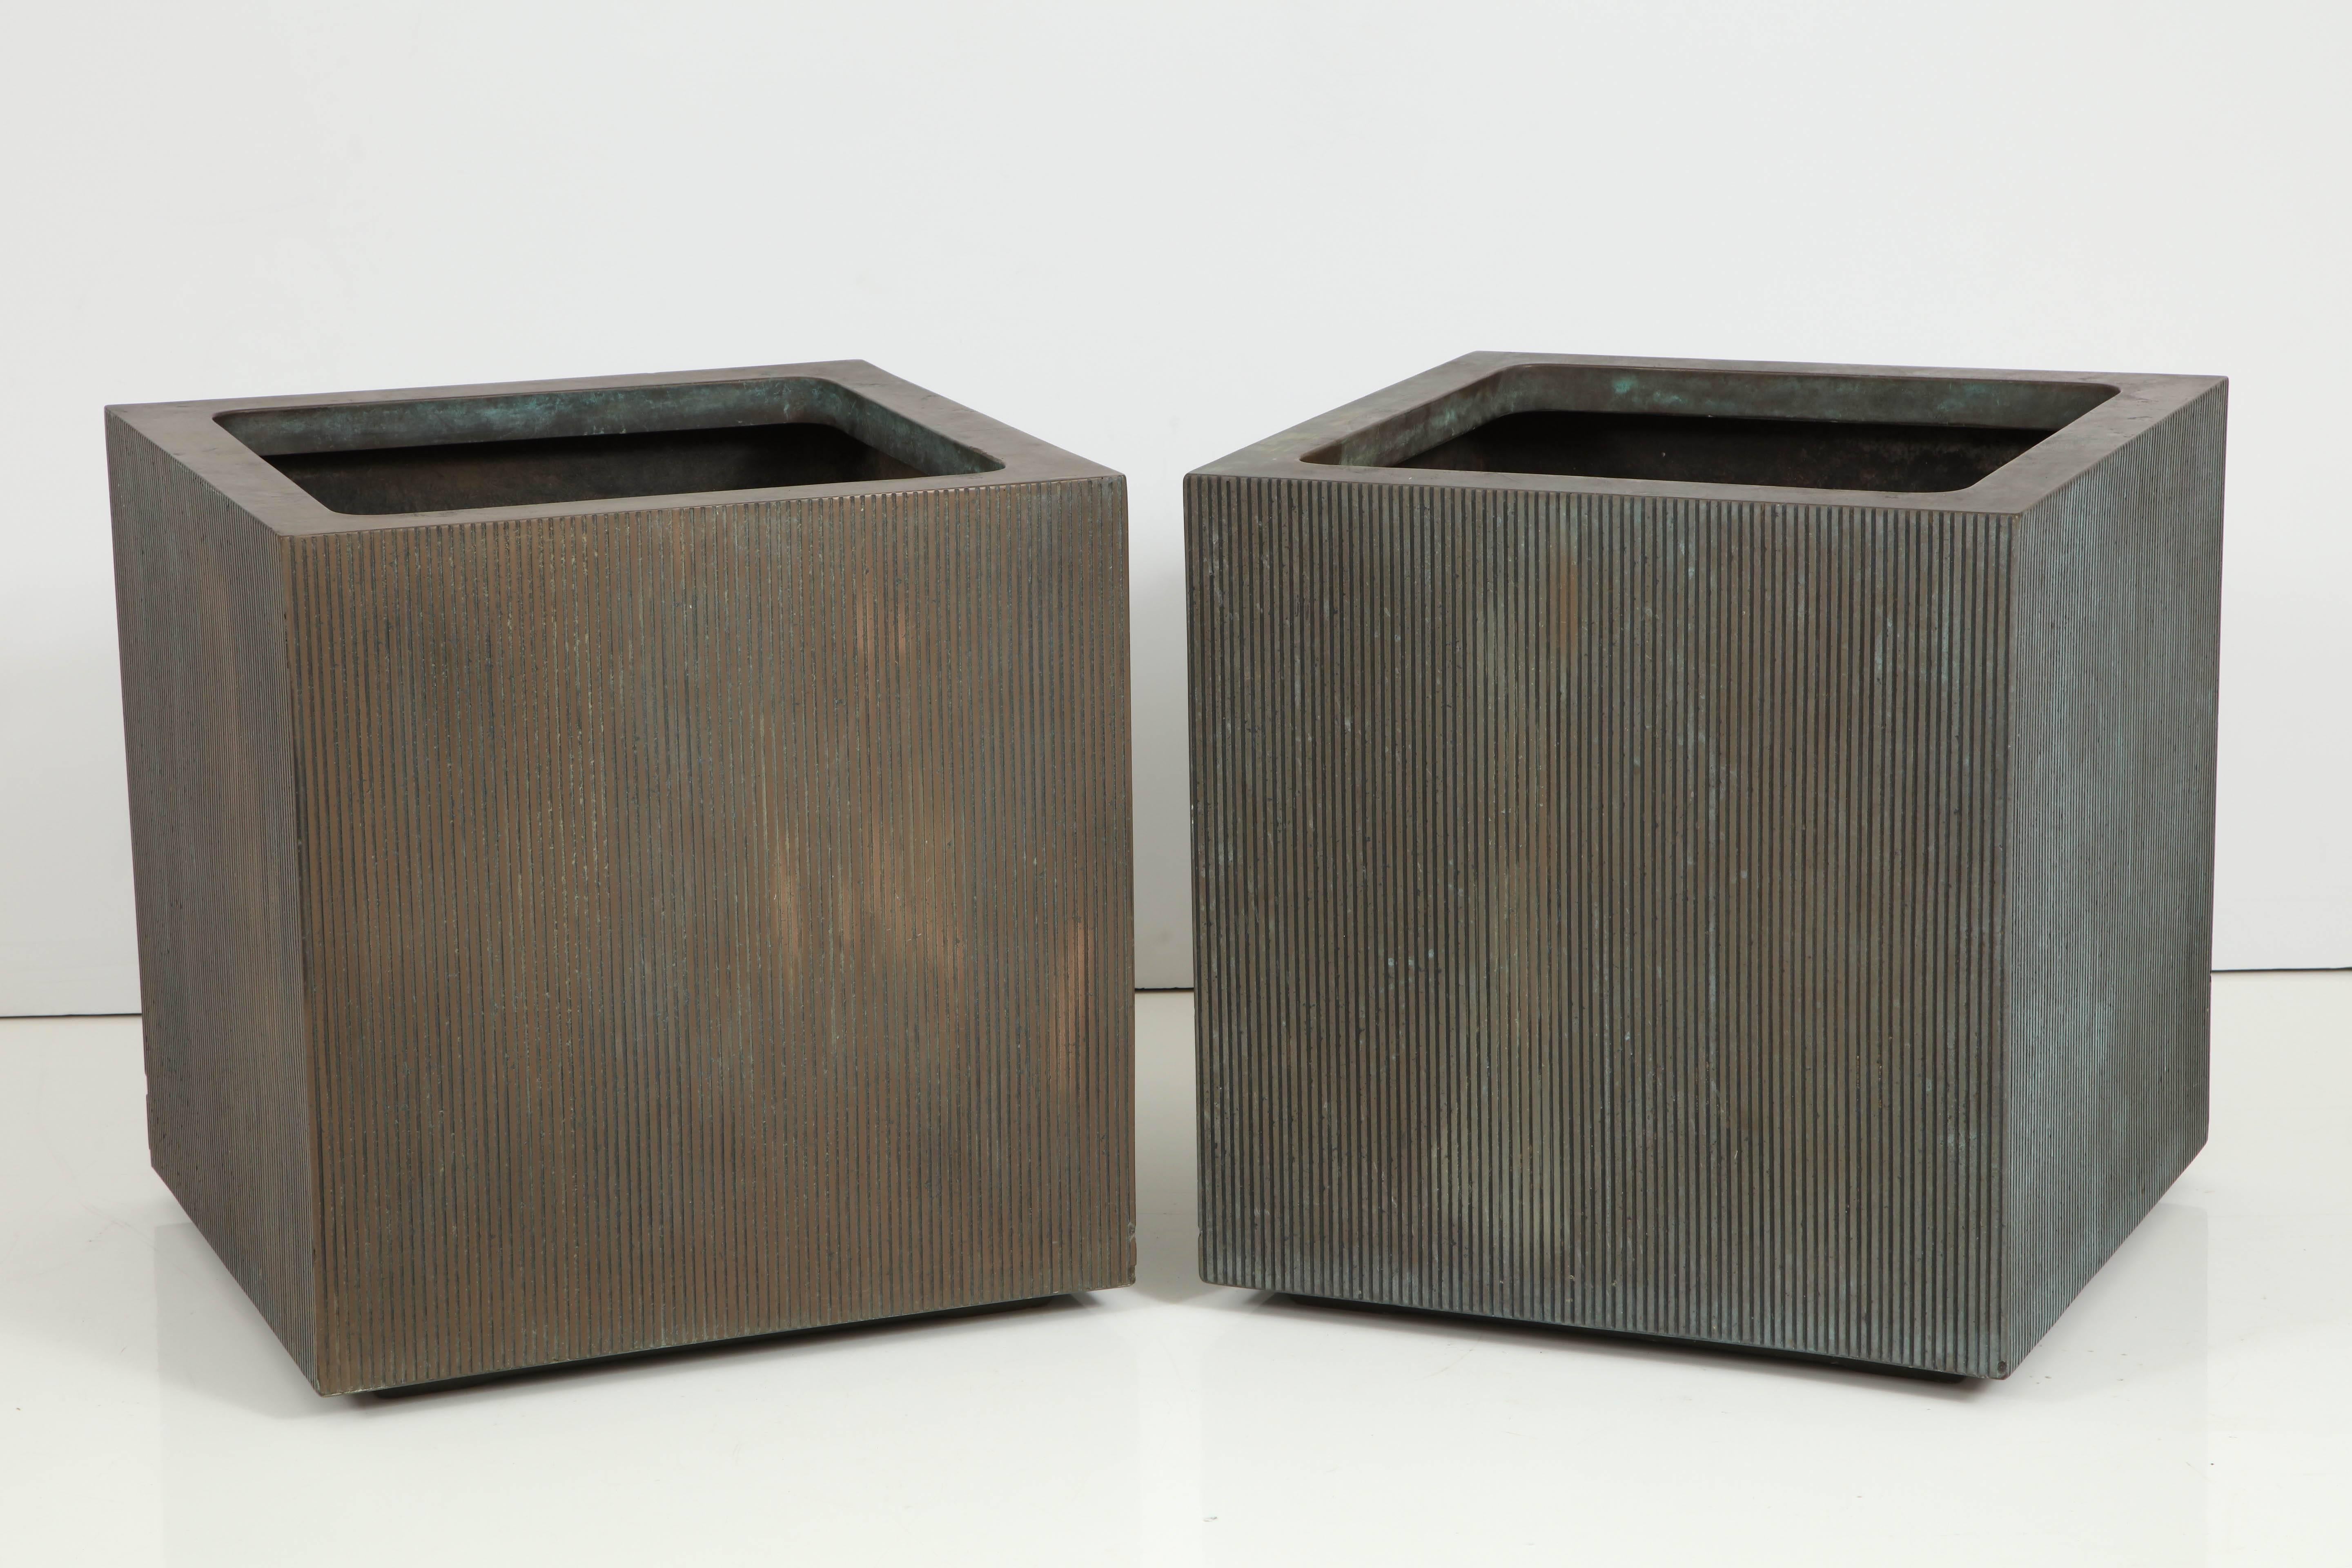 This exceptional pair of large 1970s square planters are by Forms and Surfaces, Santa Barbara CA.
The planters are beautifully executed of a heavy fiberglass resin material in a weathered Bronze color and they have a Brutalist design pattern to the